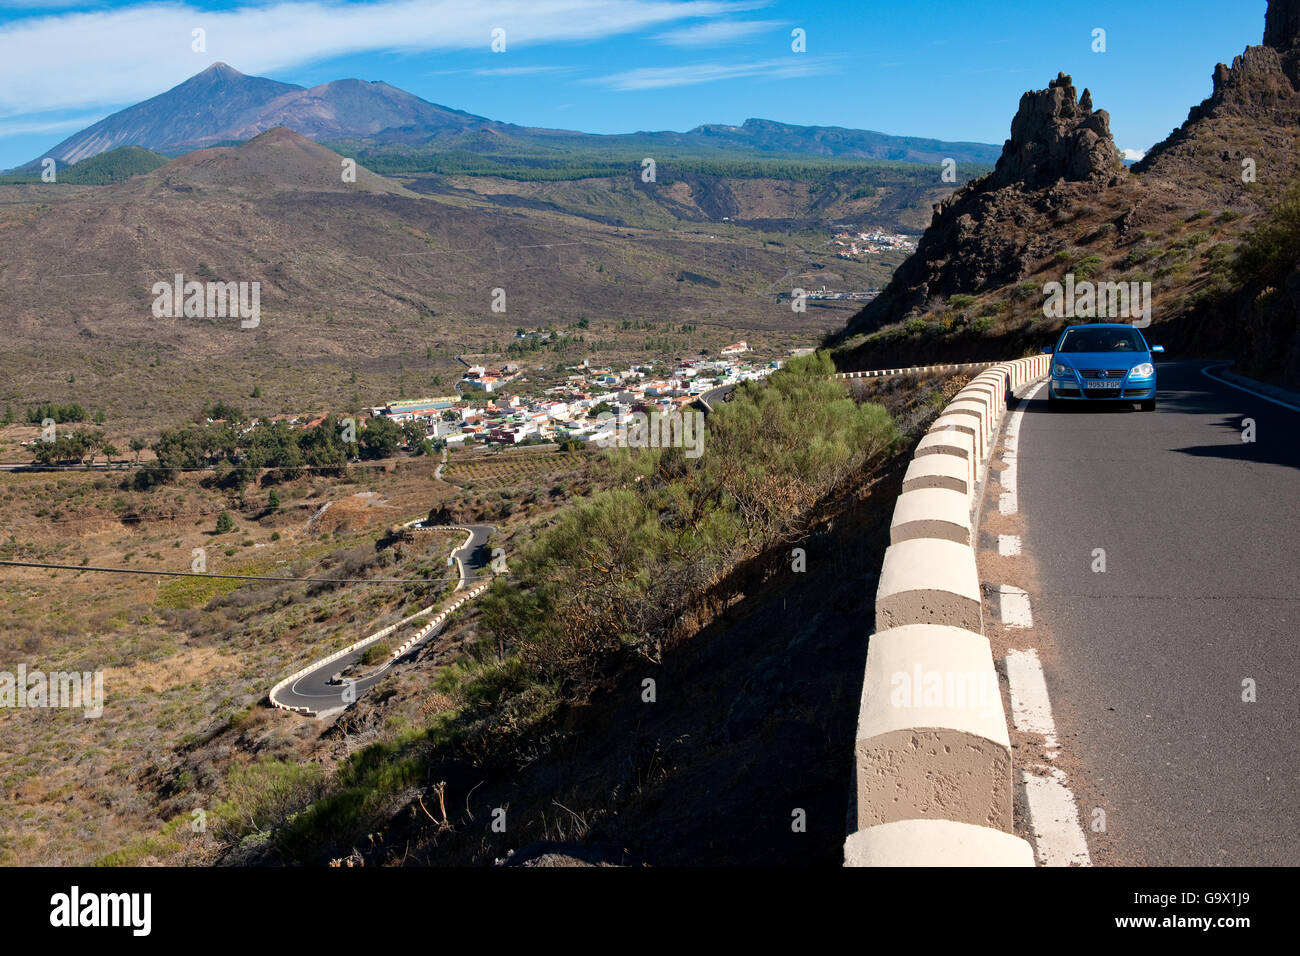 Car on Serpentine Road in Masca Valley, curves, Tenerife, Spain, Canary Islands, Europe Stock Photo